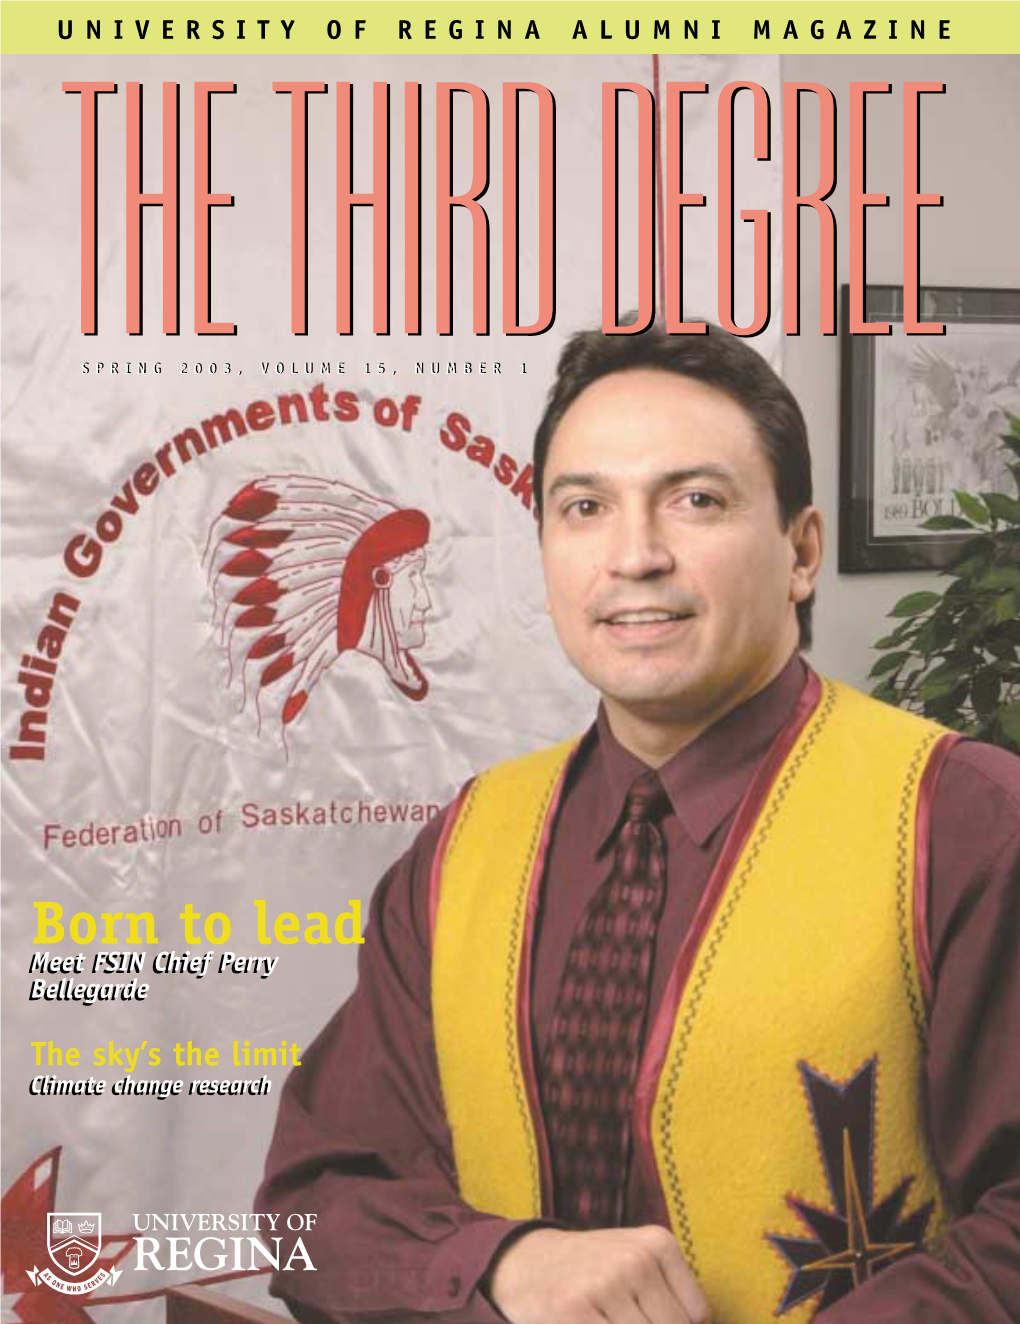 Born to Lead Meetmeet FSINFSIN Chiefchief Perryperry Bellegardebellegarde the Sky’S the Limit Climateclimate Changechange Researchresearch